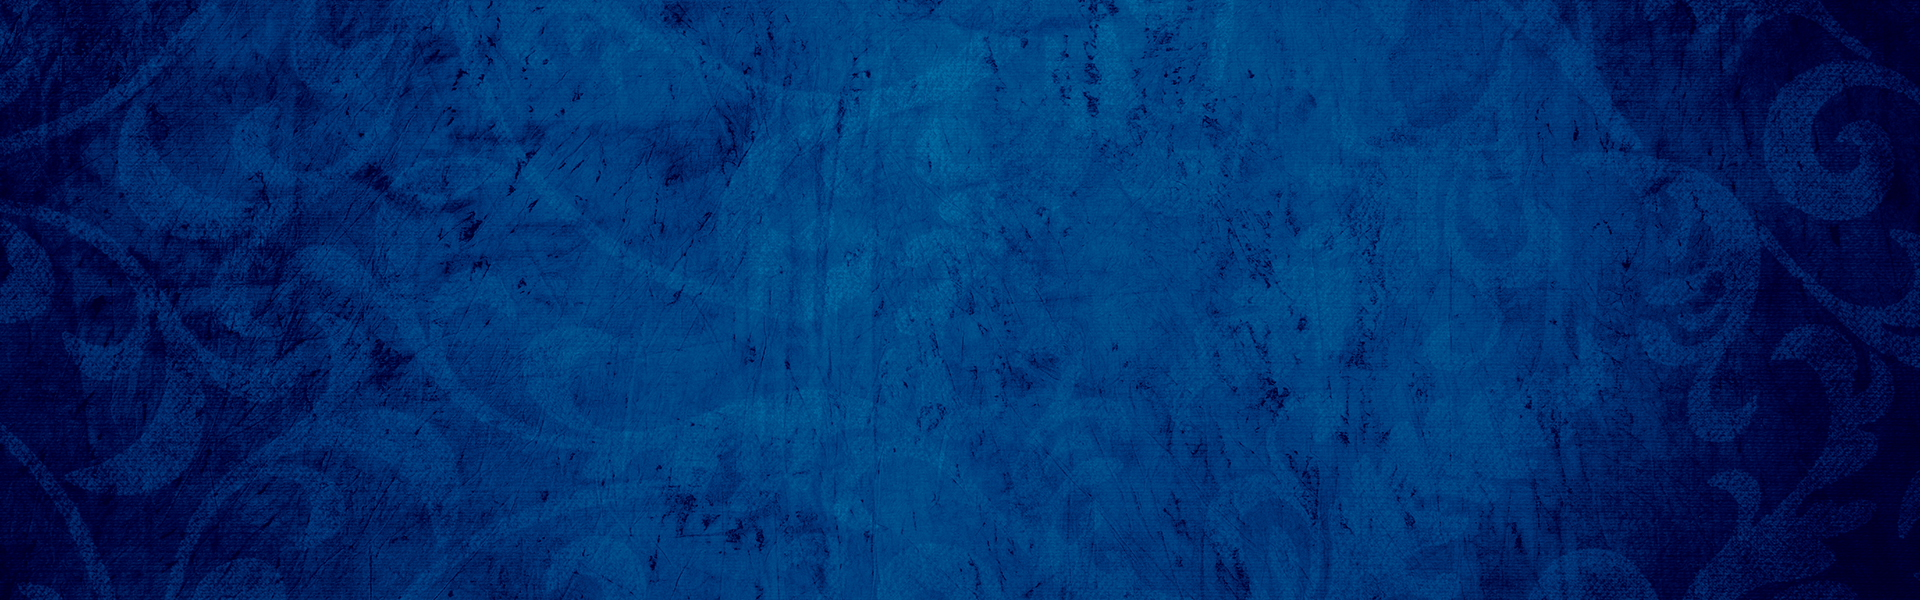 Blue with textured bacground